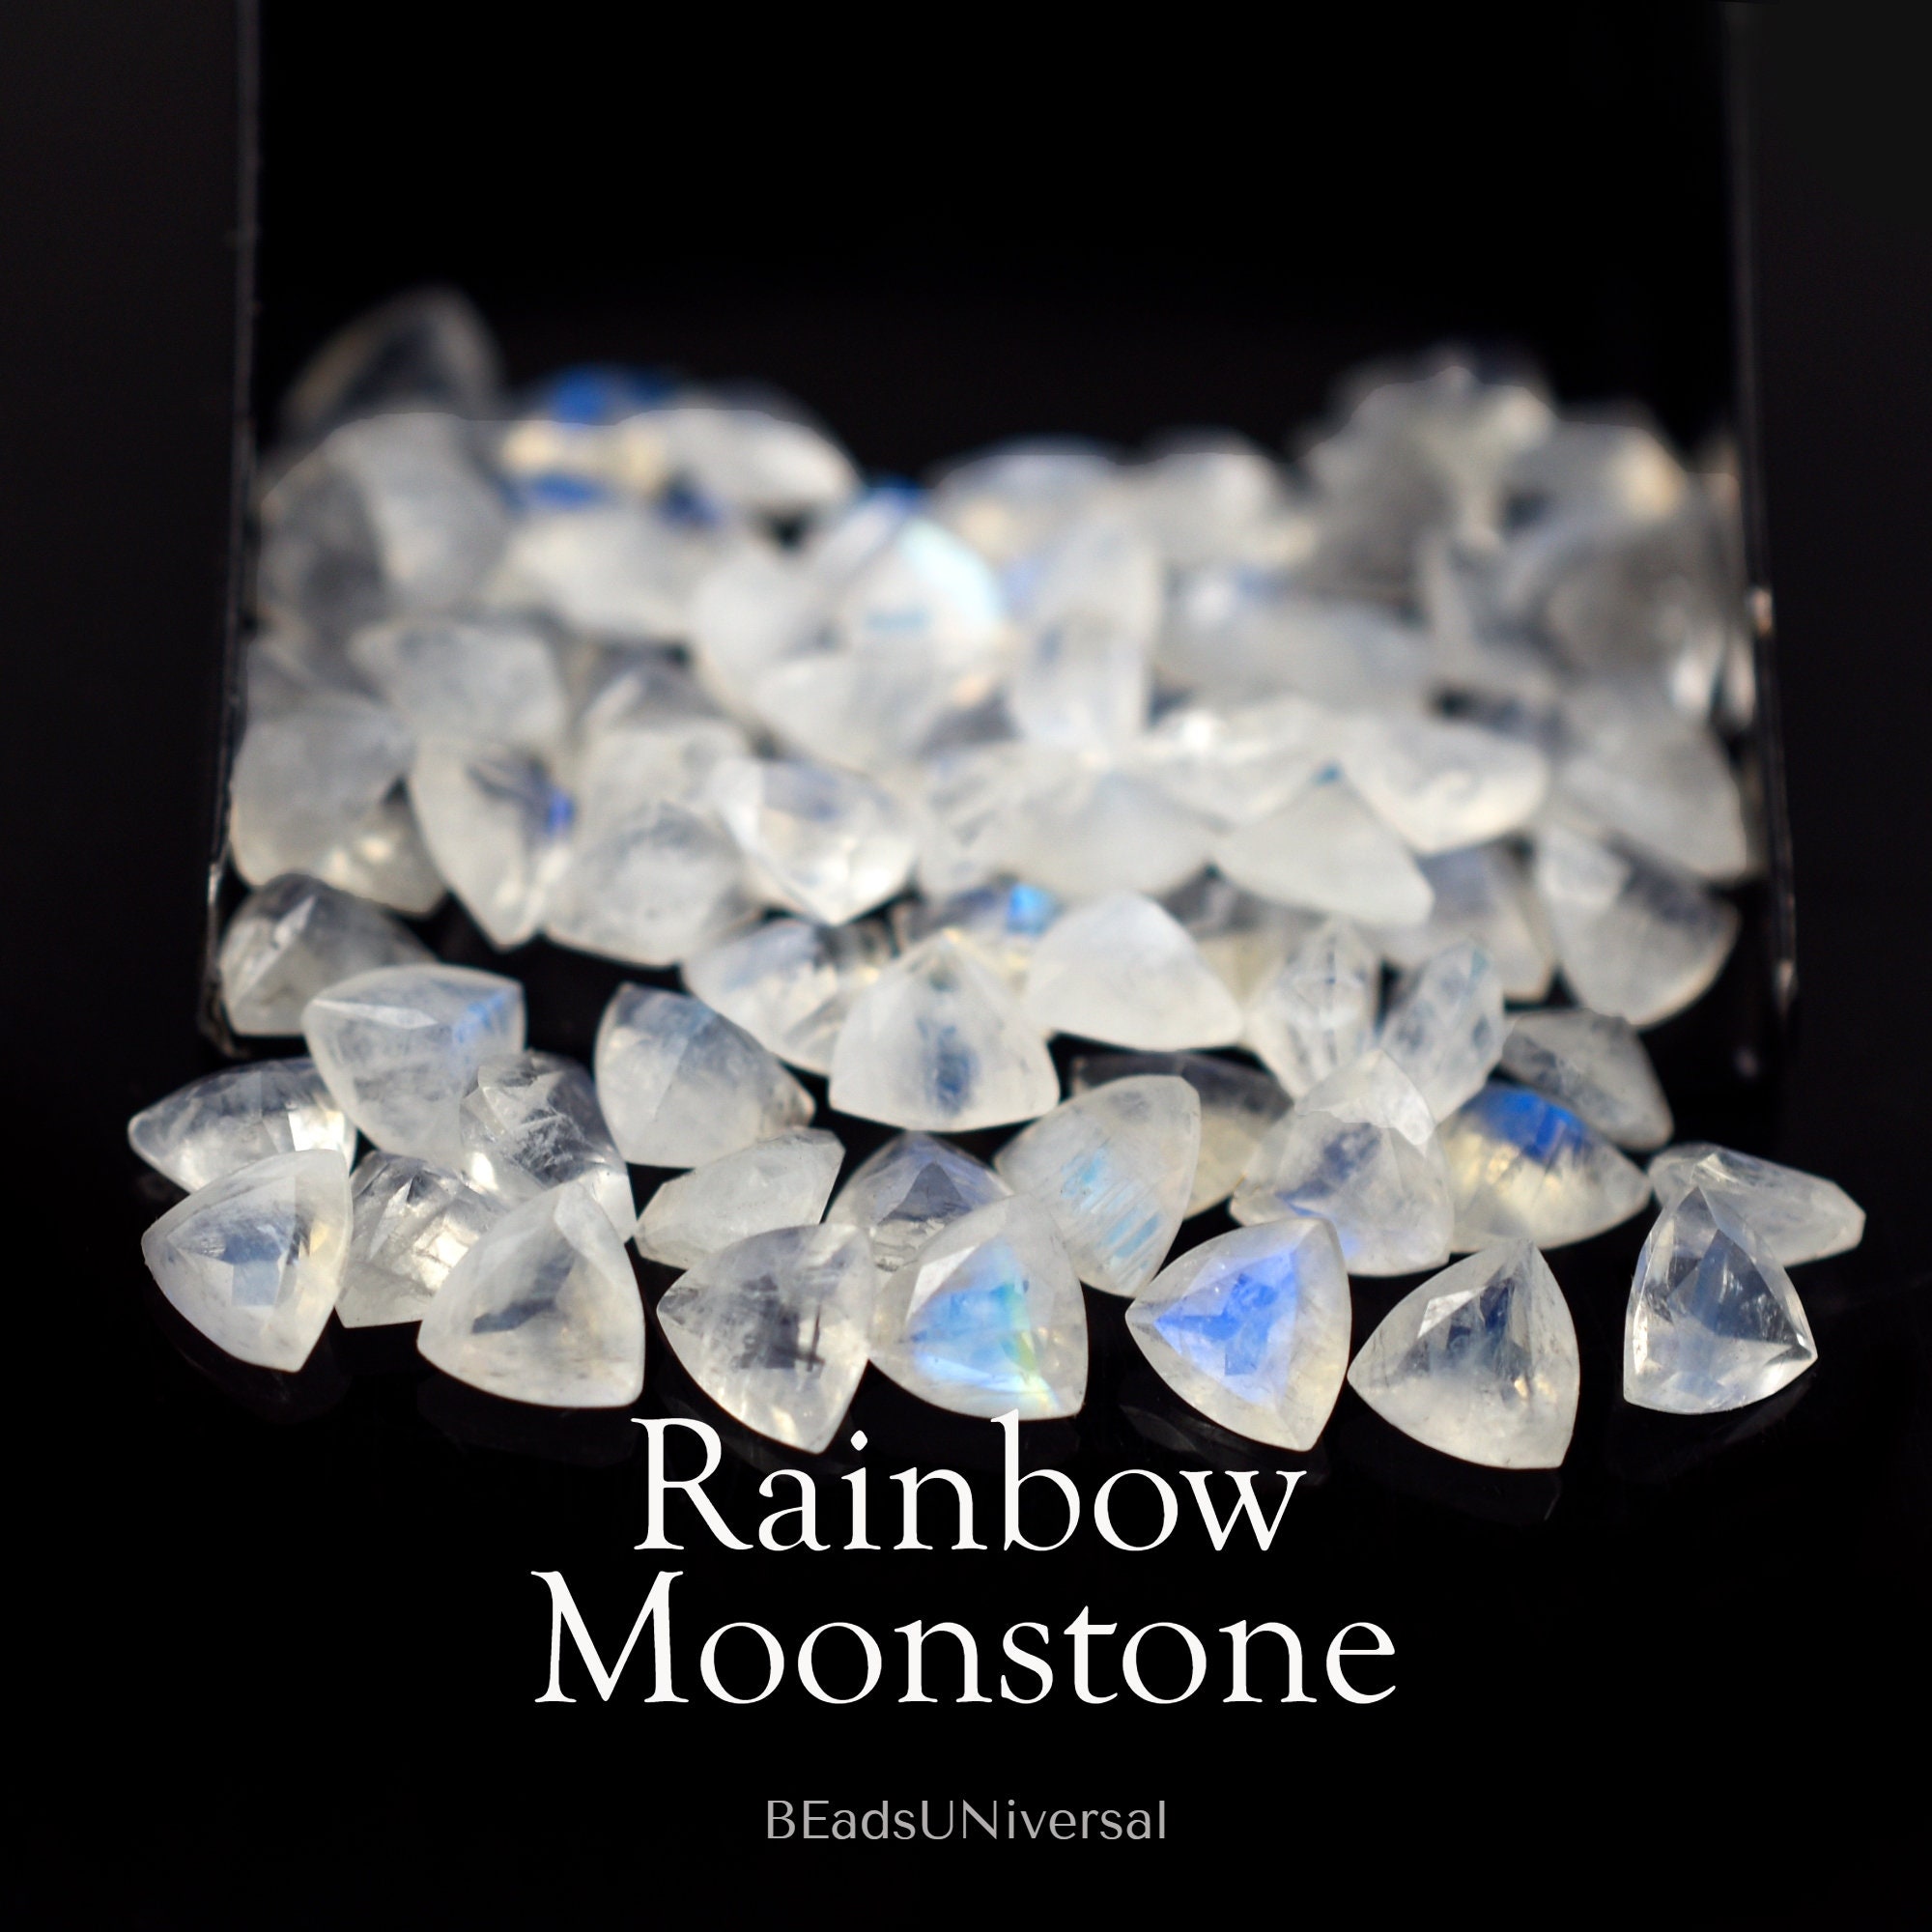 Natural Stone Blue Moonstone Beads Faceted Square Shape Loose For